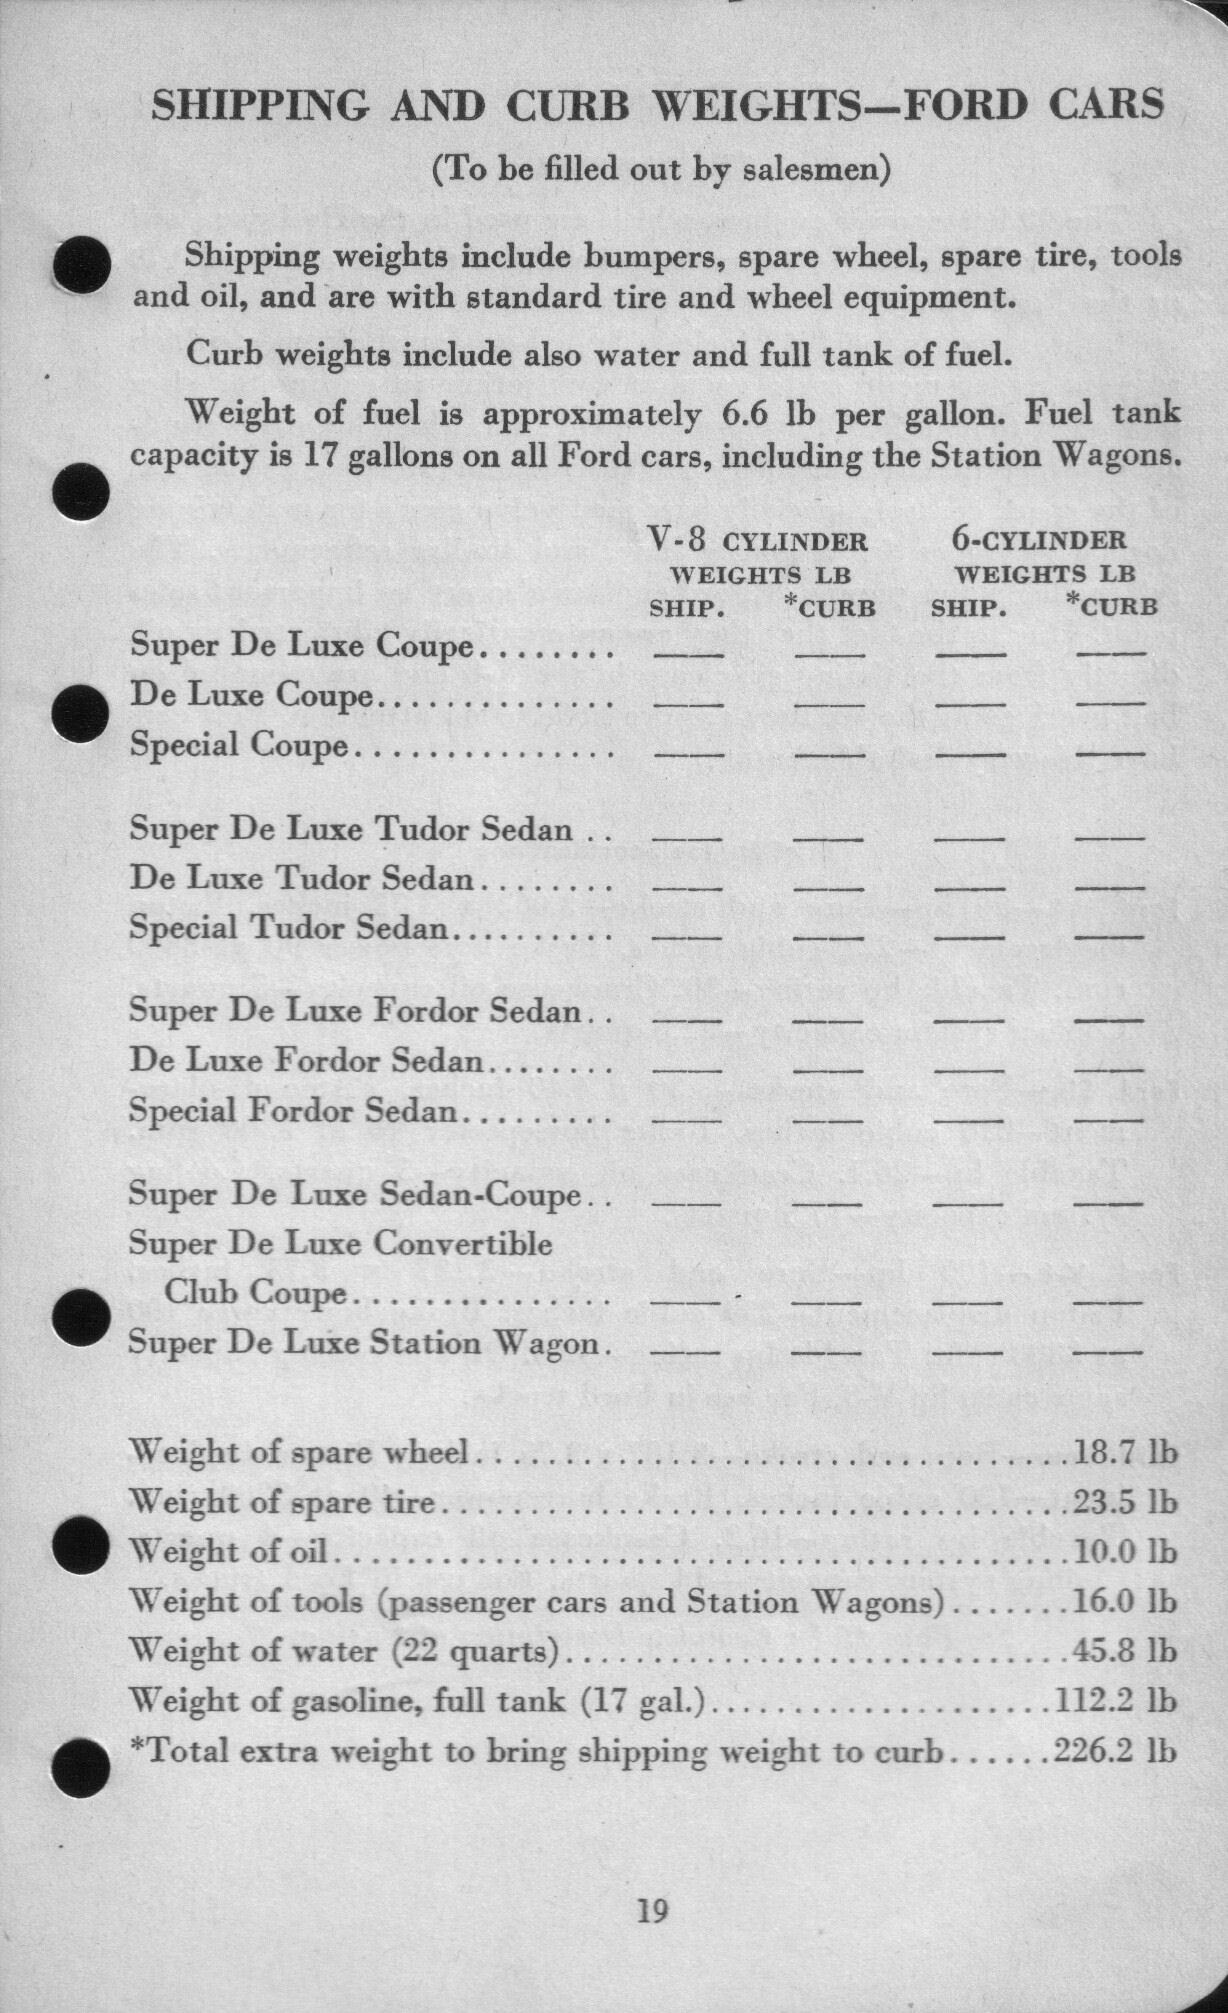 1942_Ford_Salesmans_Reference_Manual-019